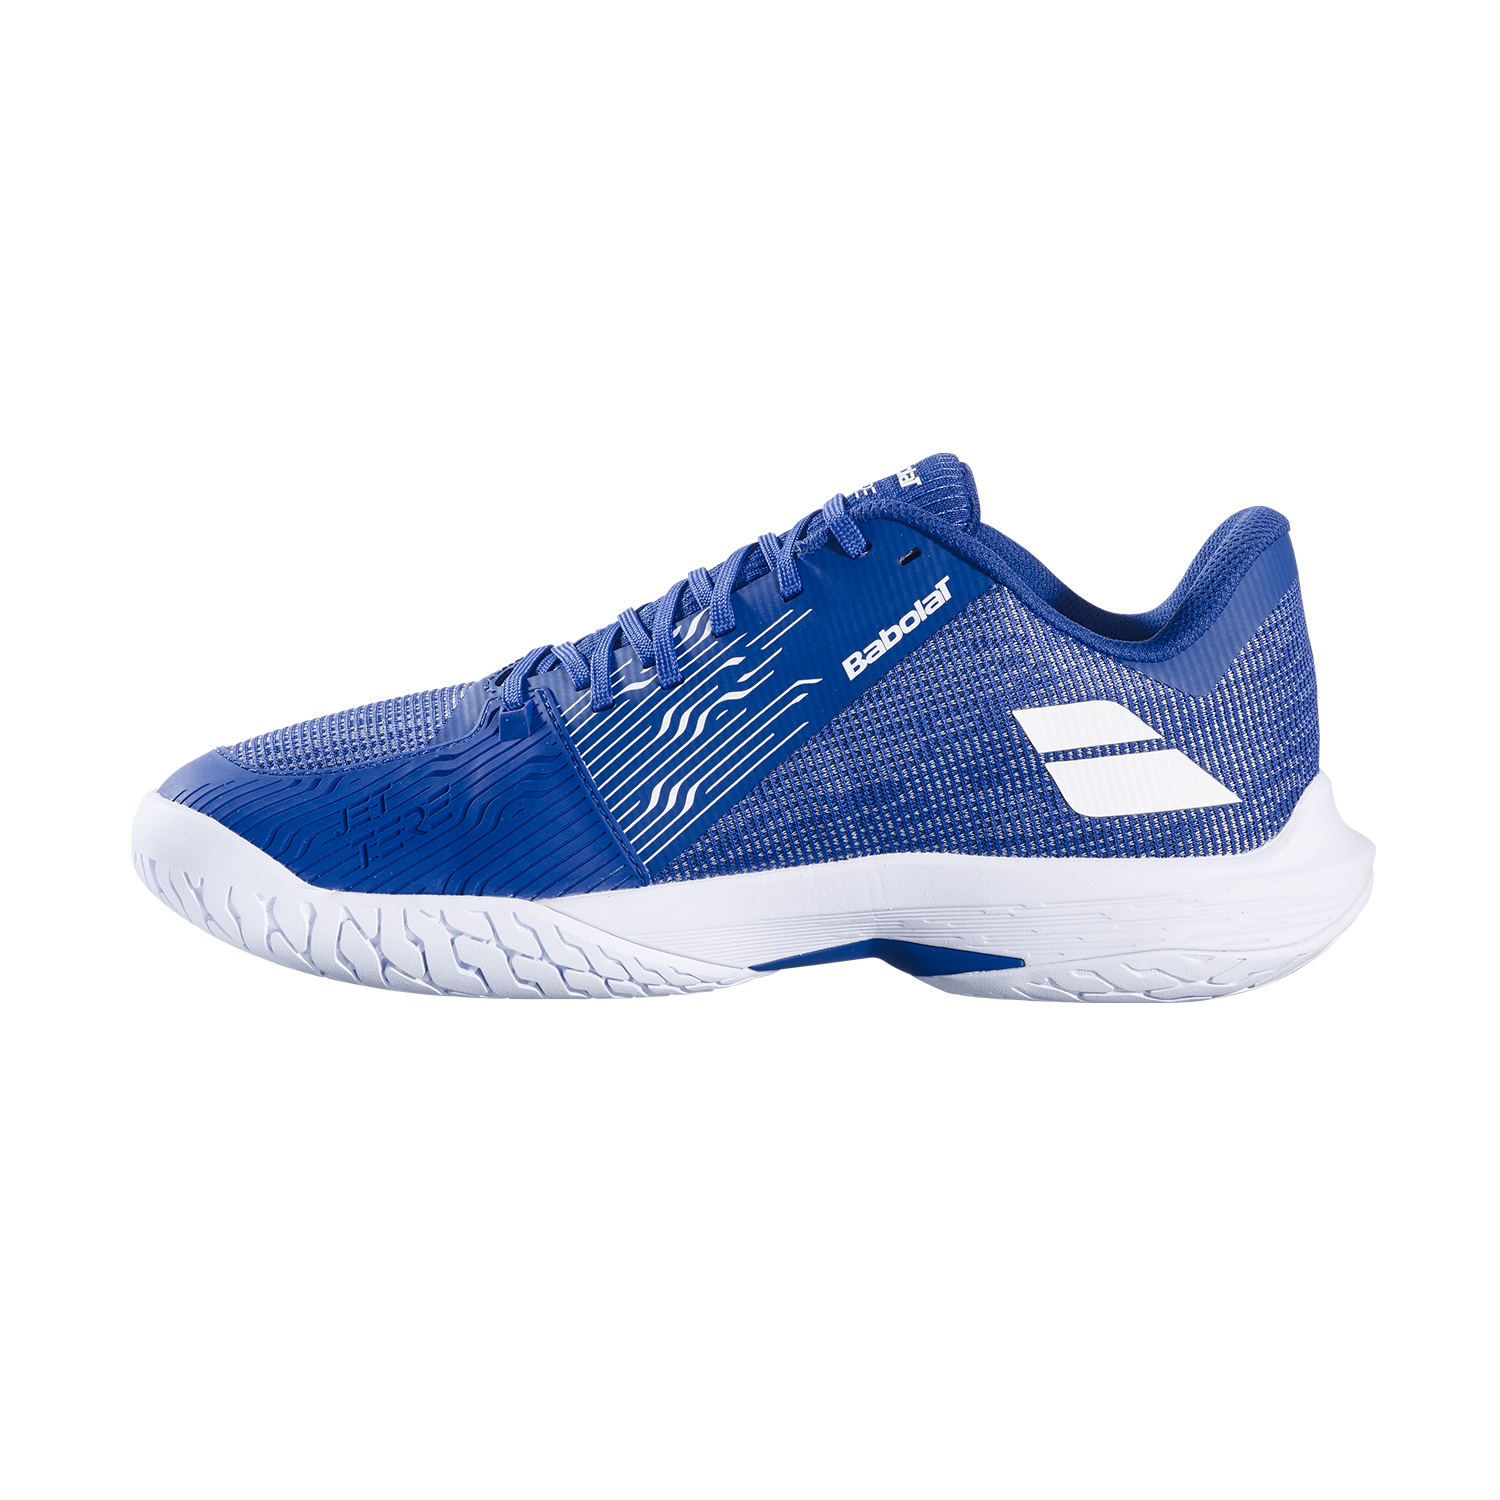 Babolat Jet Tere 2 All Court - Mombeo Blue